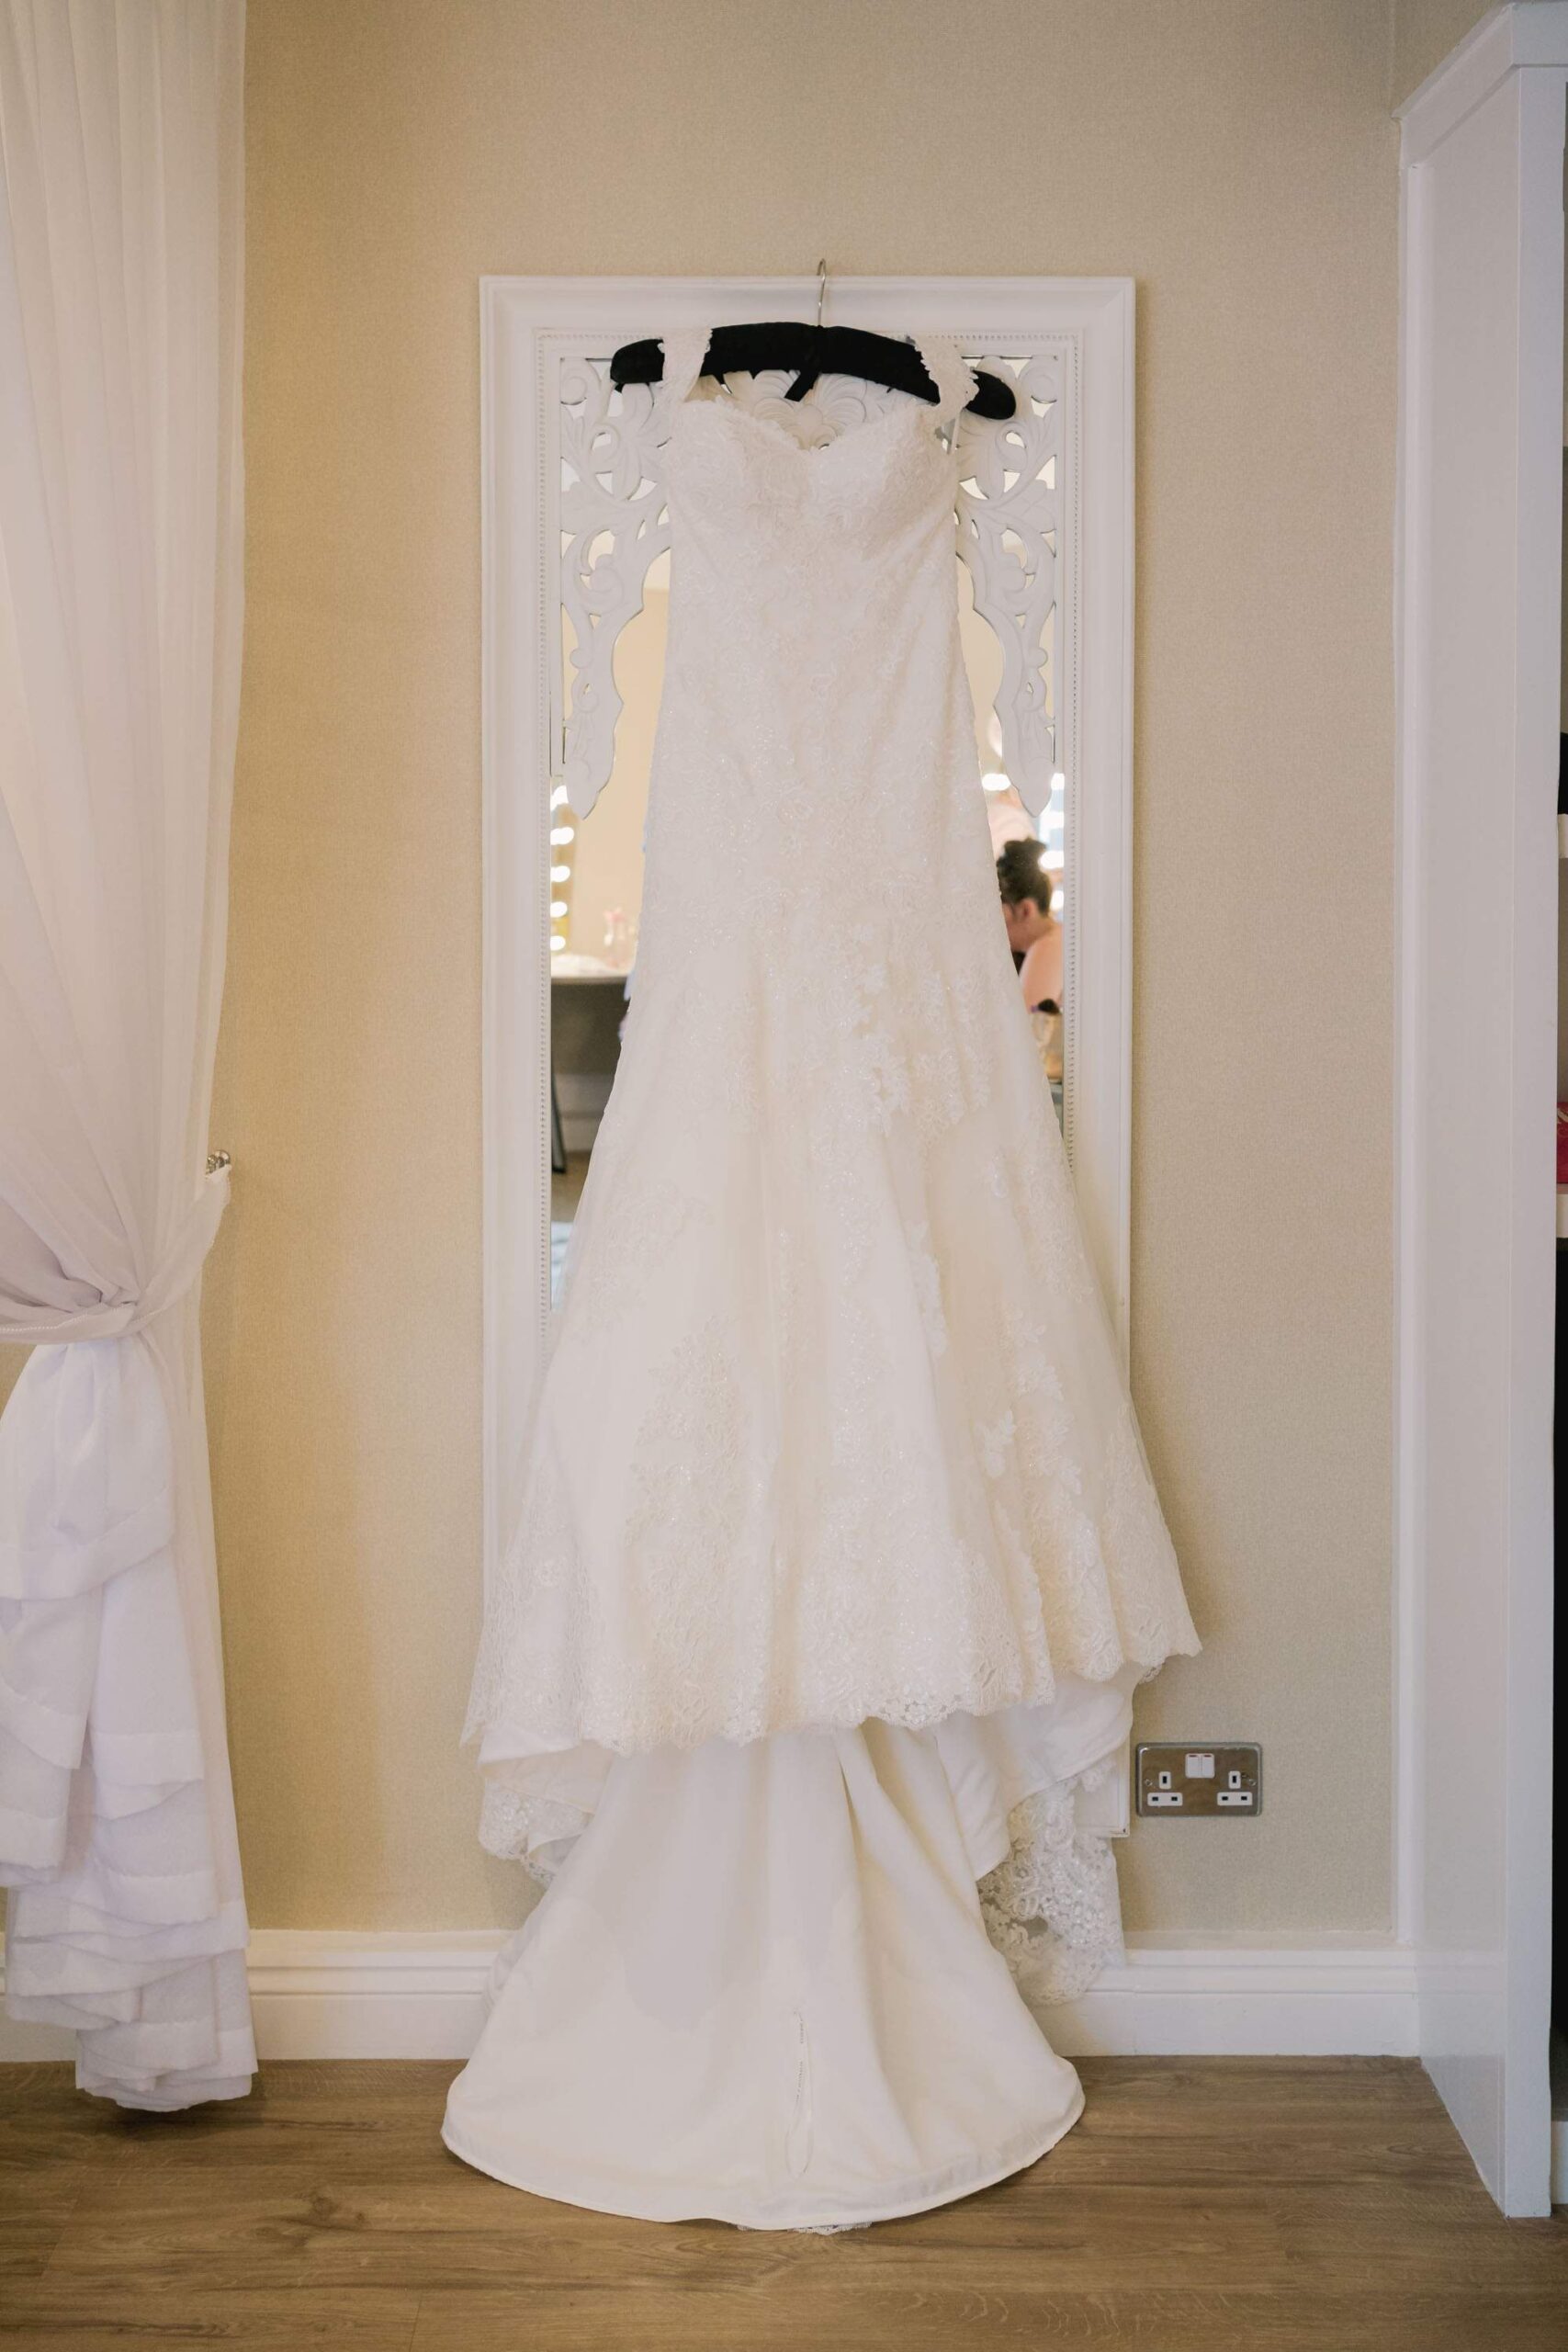 Traditional wedding dress hanging against a mirror at Old Thorns Hotel in Hampshire.